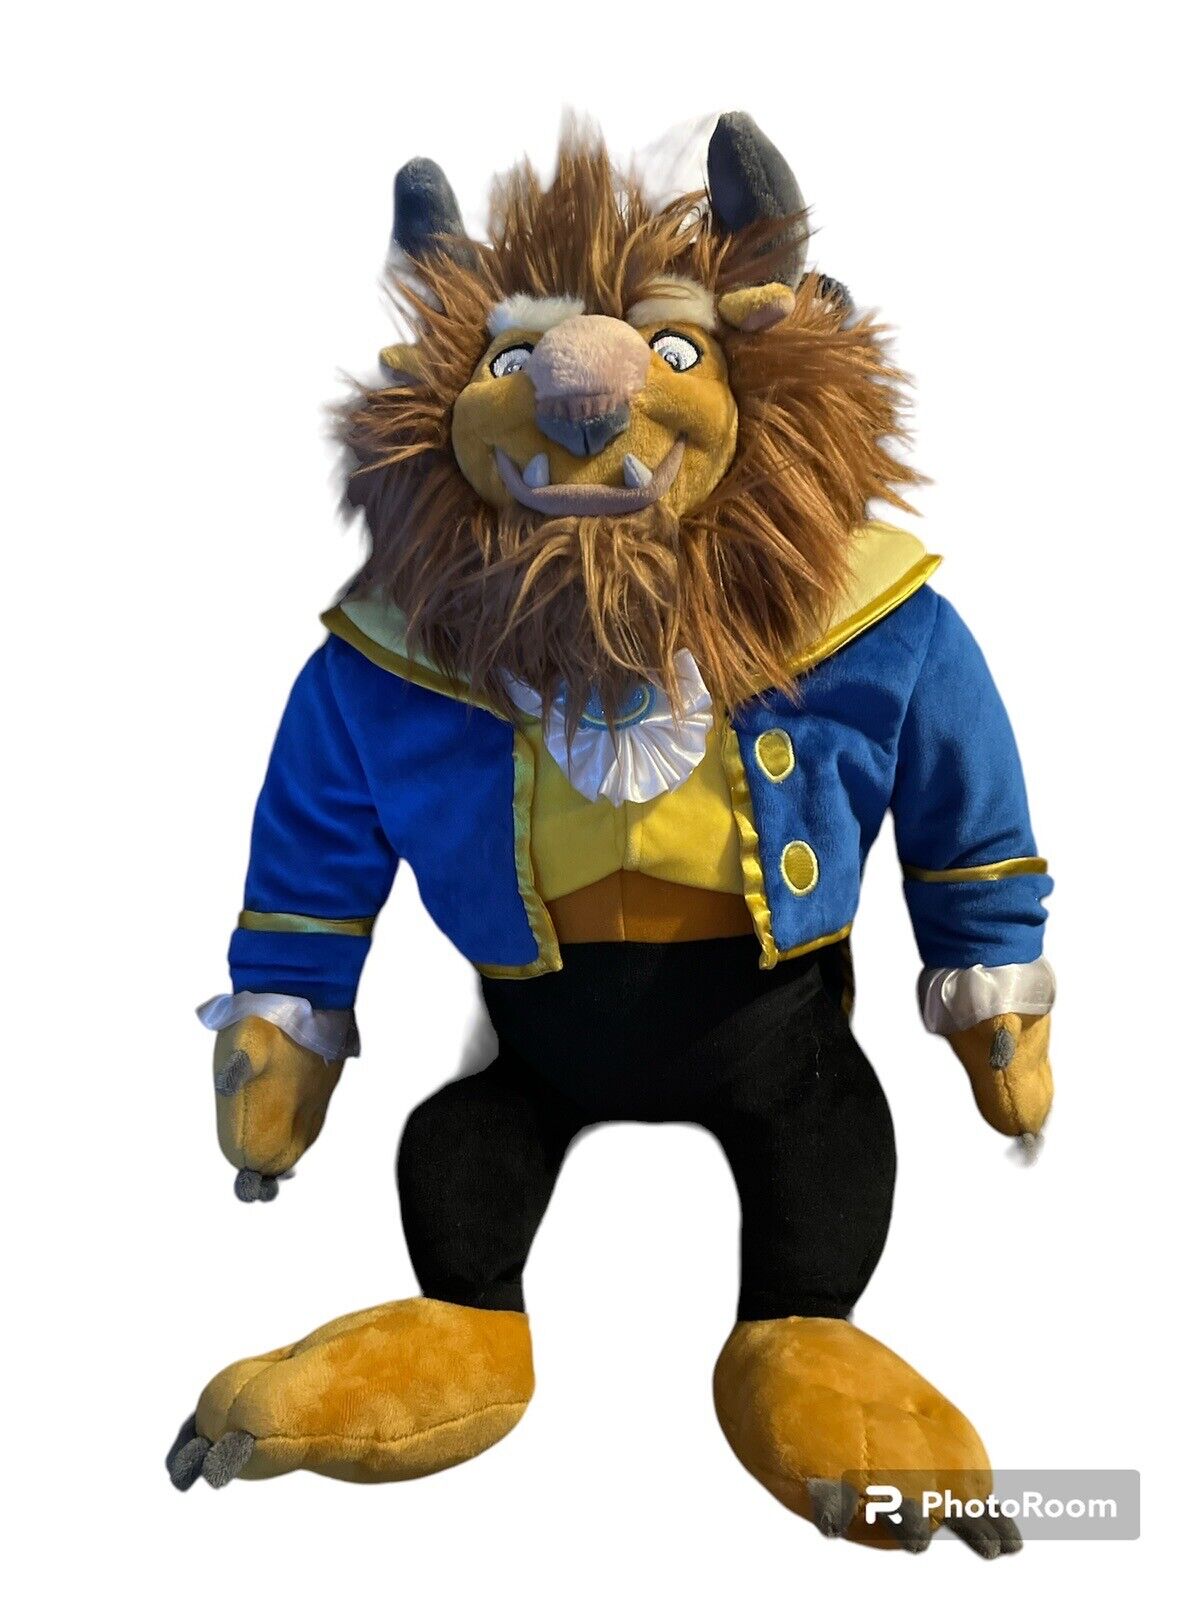 Disney “Beast” From Beauty And The Beast Movie. Stuffed Plush. Good Condition 